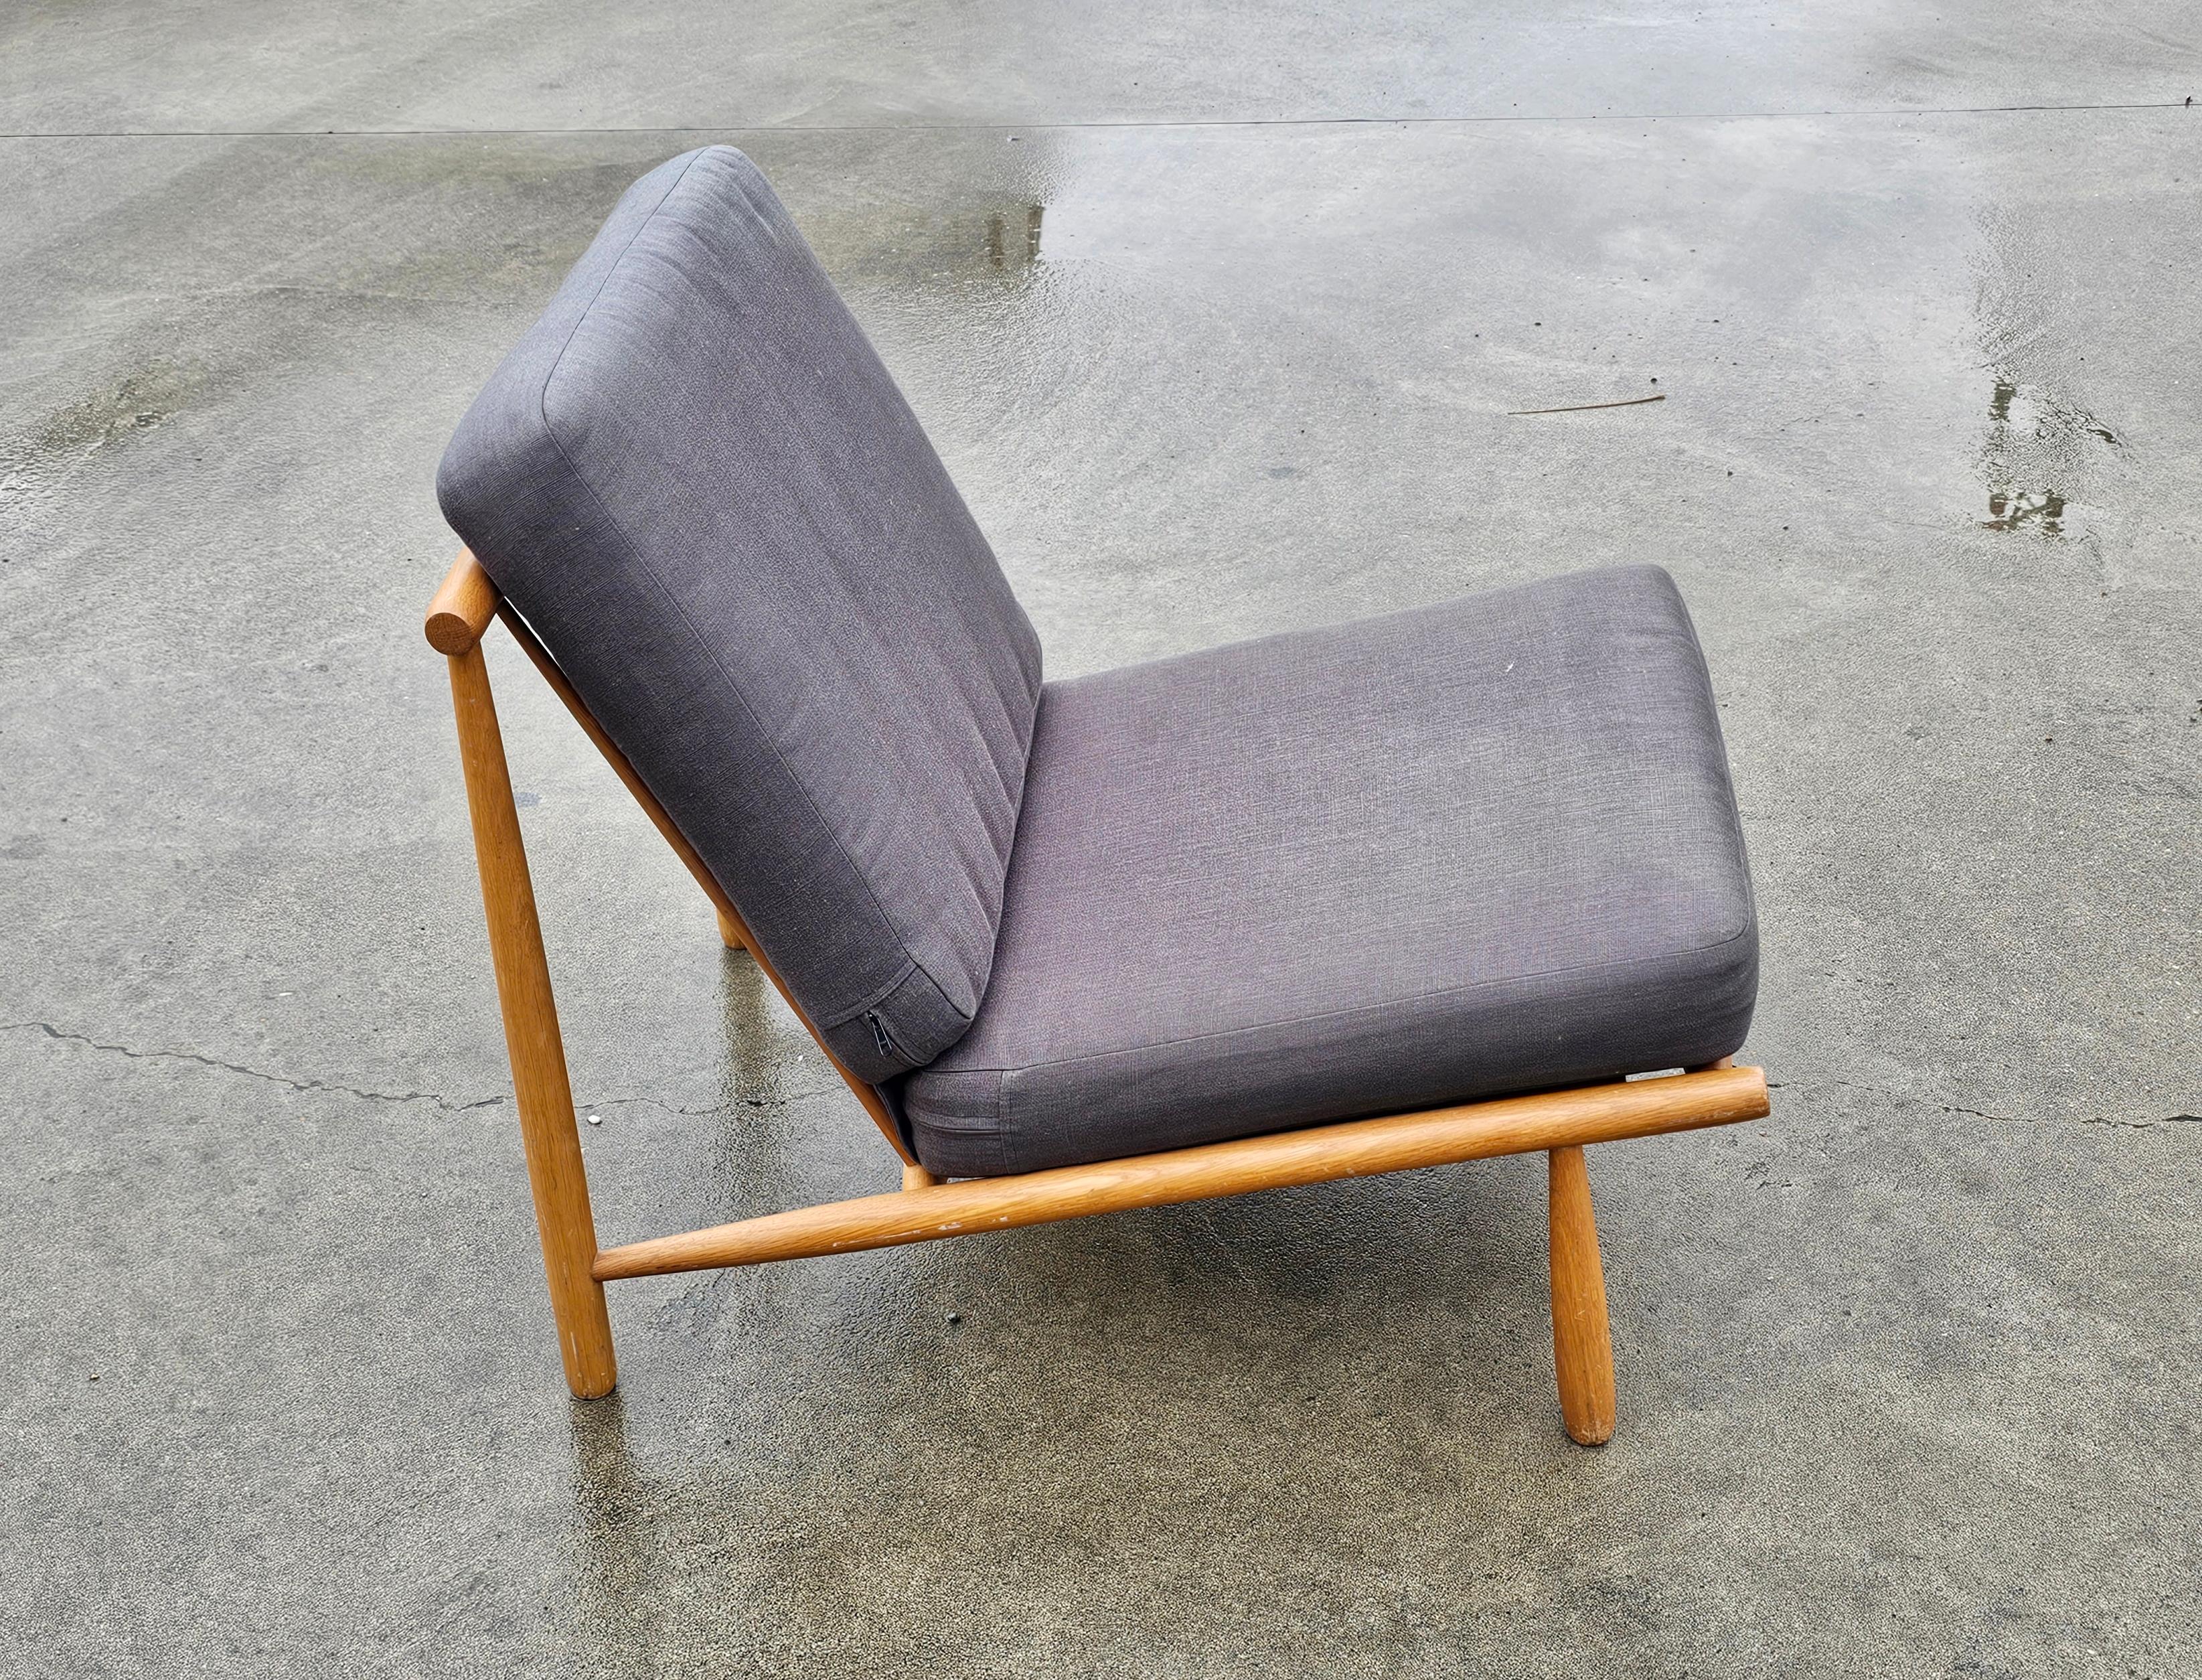 Pair of Domus Lounge Chairs by Alf Svensson for Dux Sweden, Sweden 1960s For Sale 1